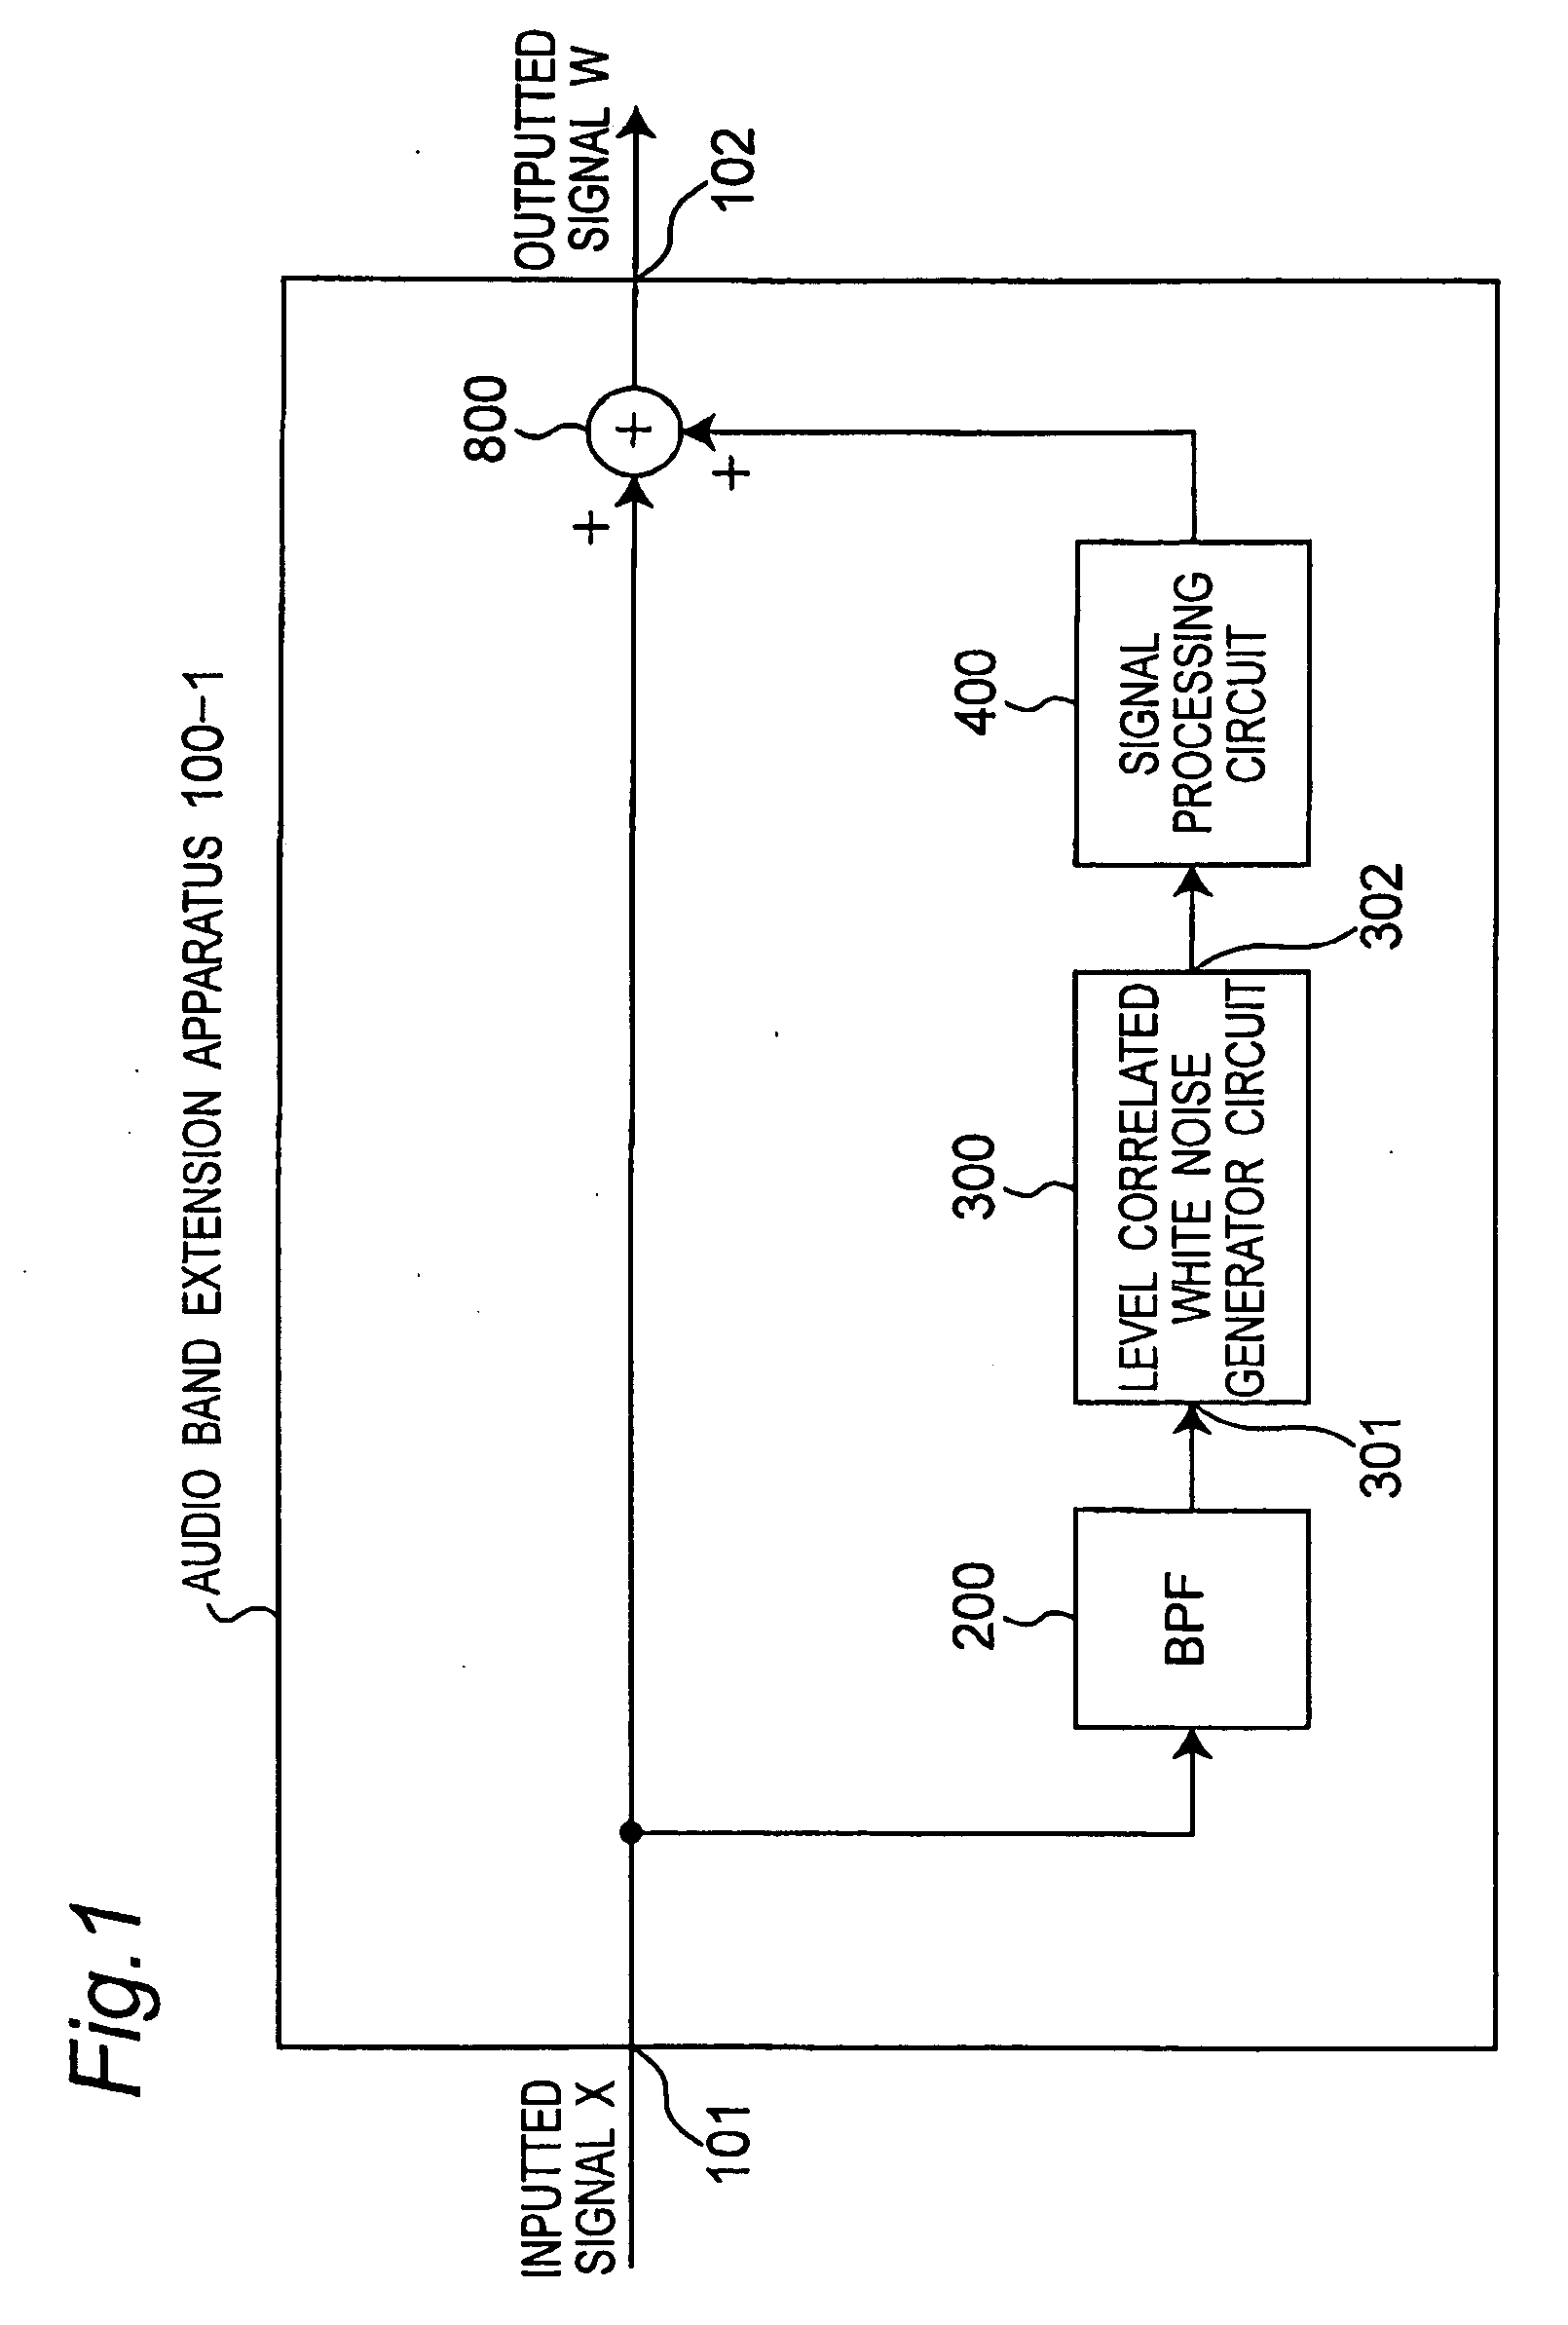 Method and apparatus for extending band of audio signal using noise signal generator